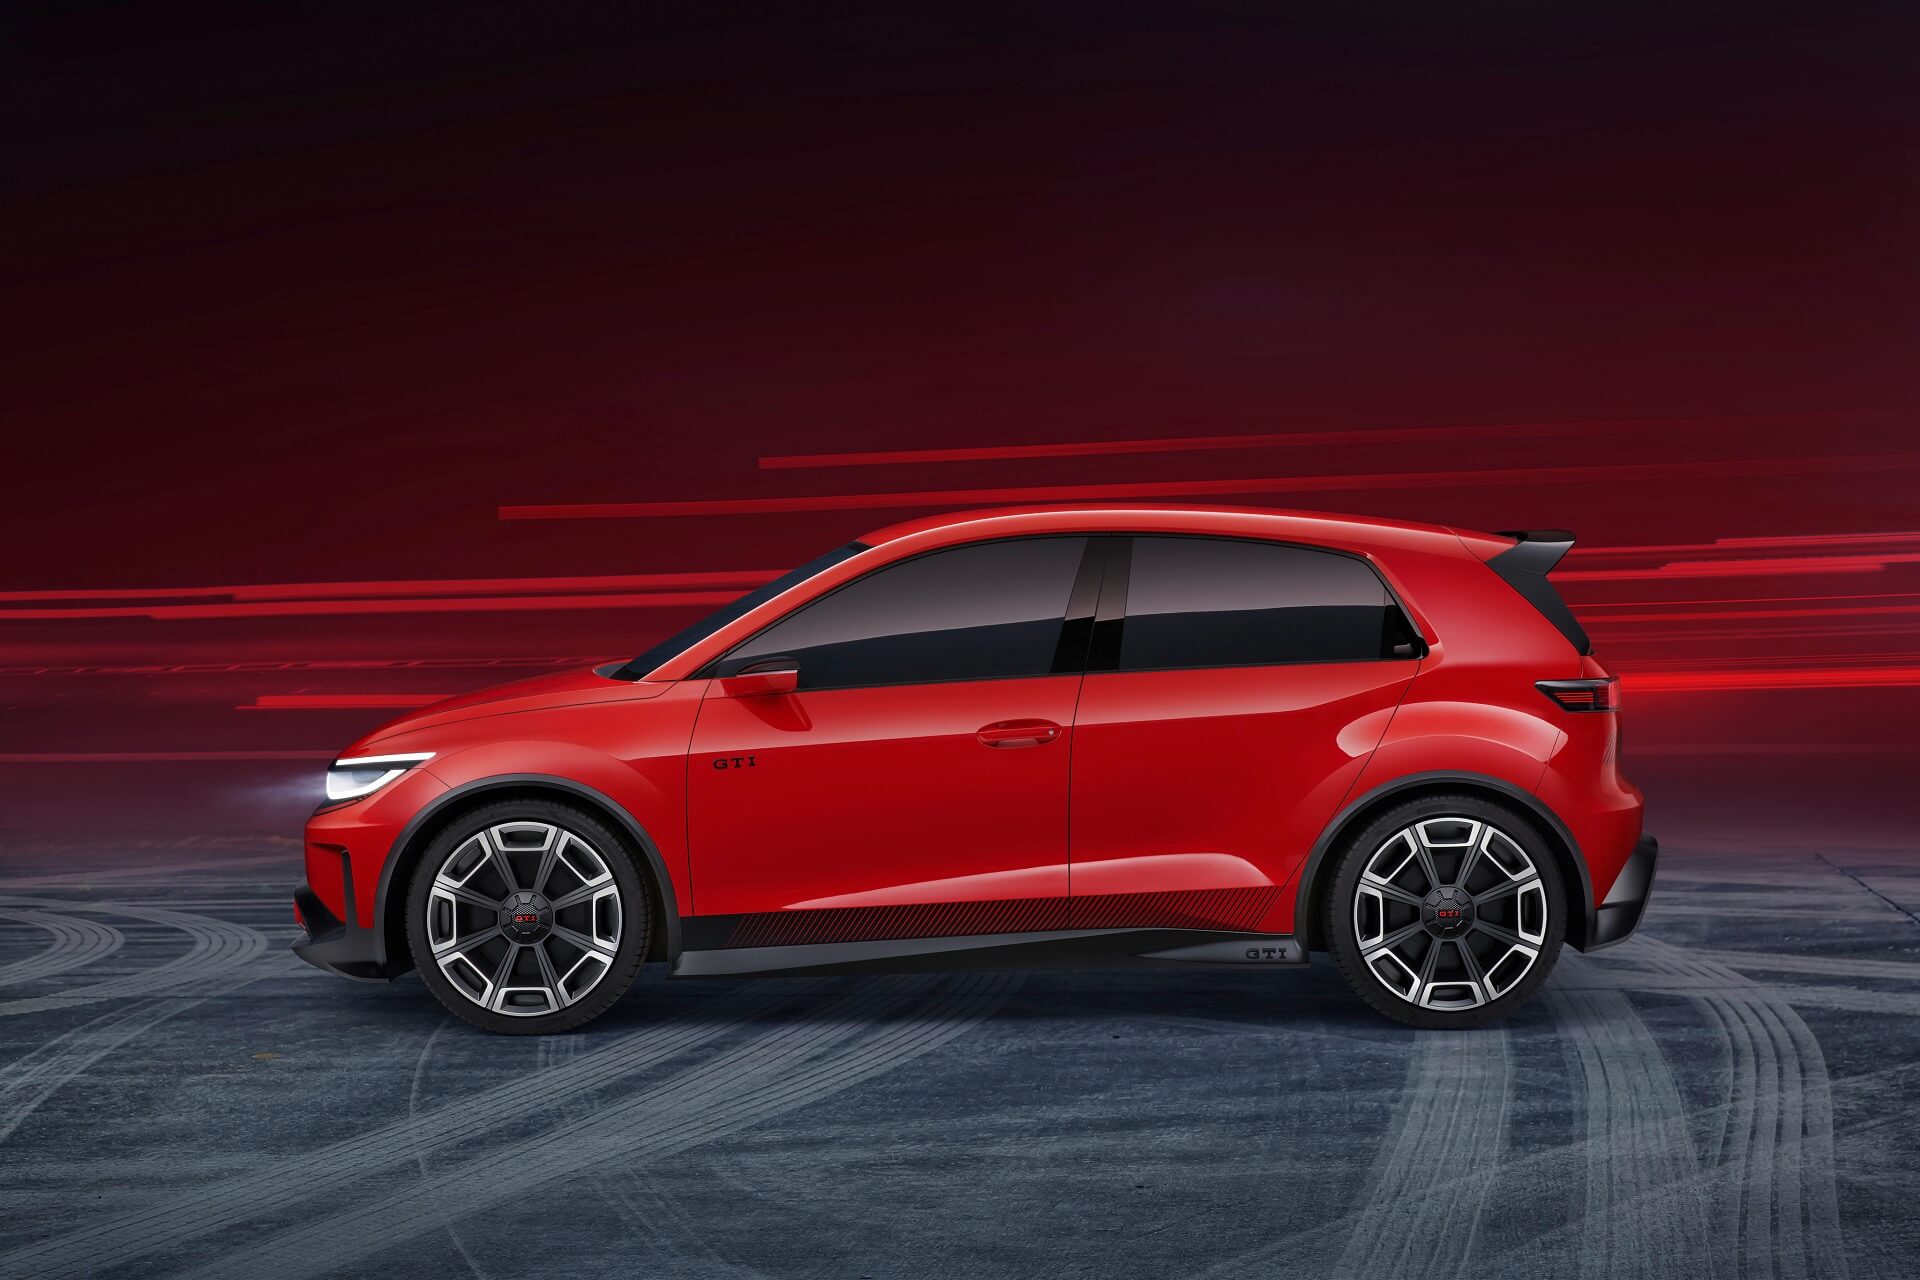 1693830756 603 Volkswagen ID introduced the GTI Concept electric model